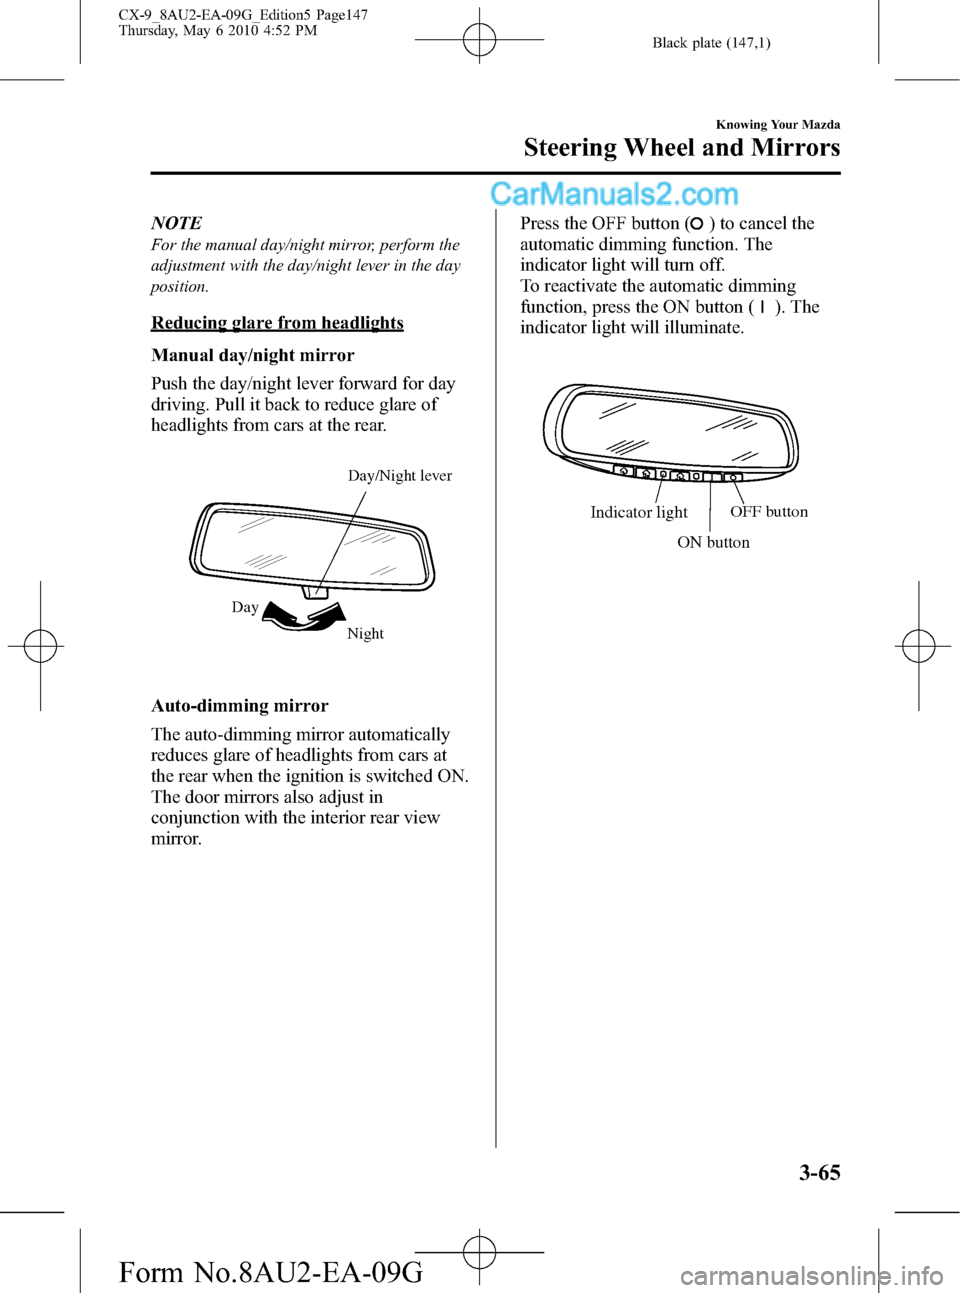 MAZDA MODEL CX-9 2010  Owners Manual (in English) Black plate (147,1)
NOTE
For the manual day/night mirror, perform the
adjustment with the day/night lever in the day
position.
Reducing glare from headlights
Manual day/night mirror
Push the day/night